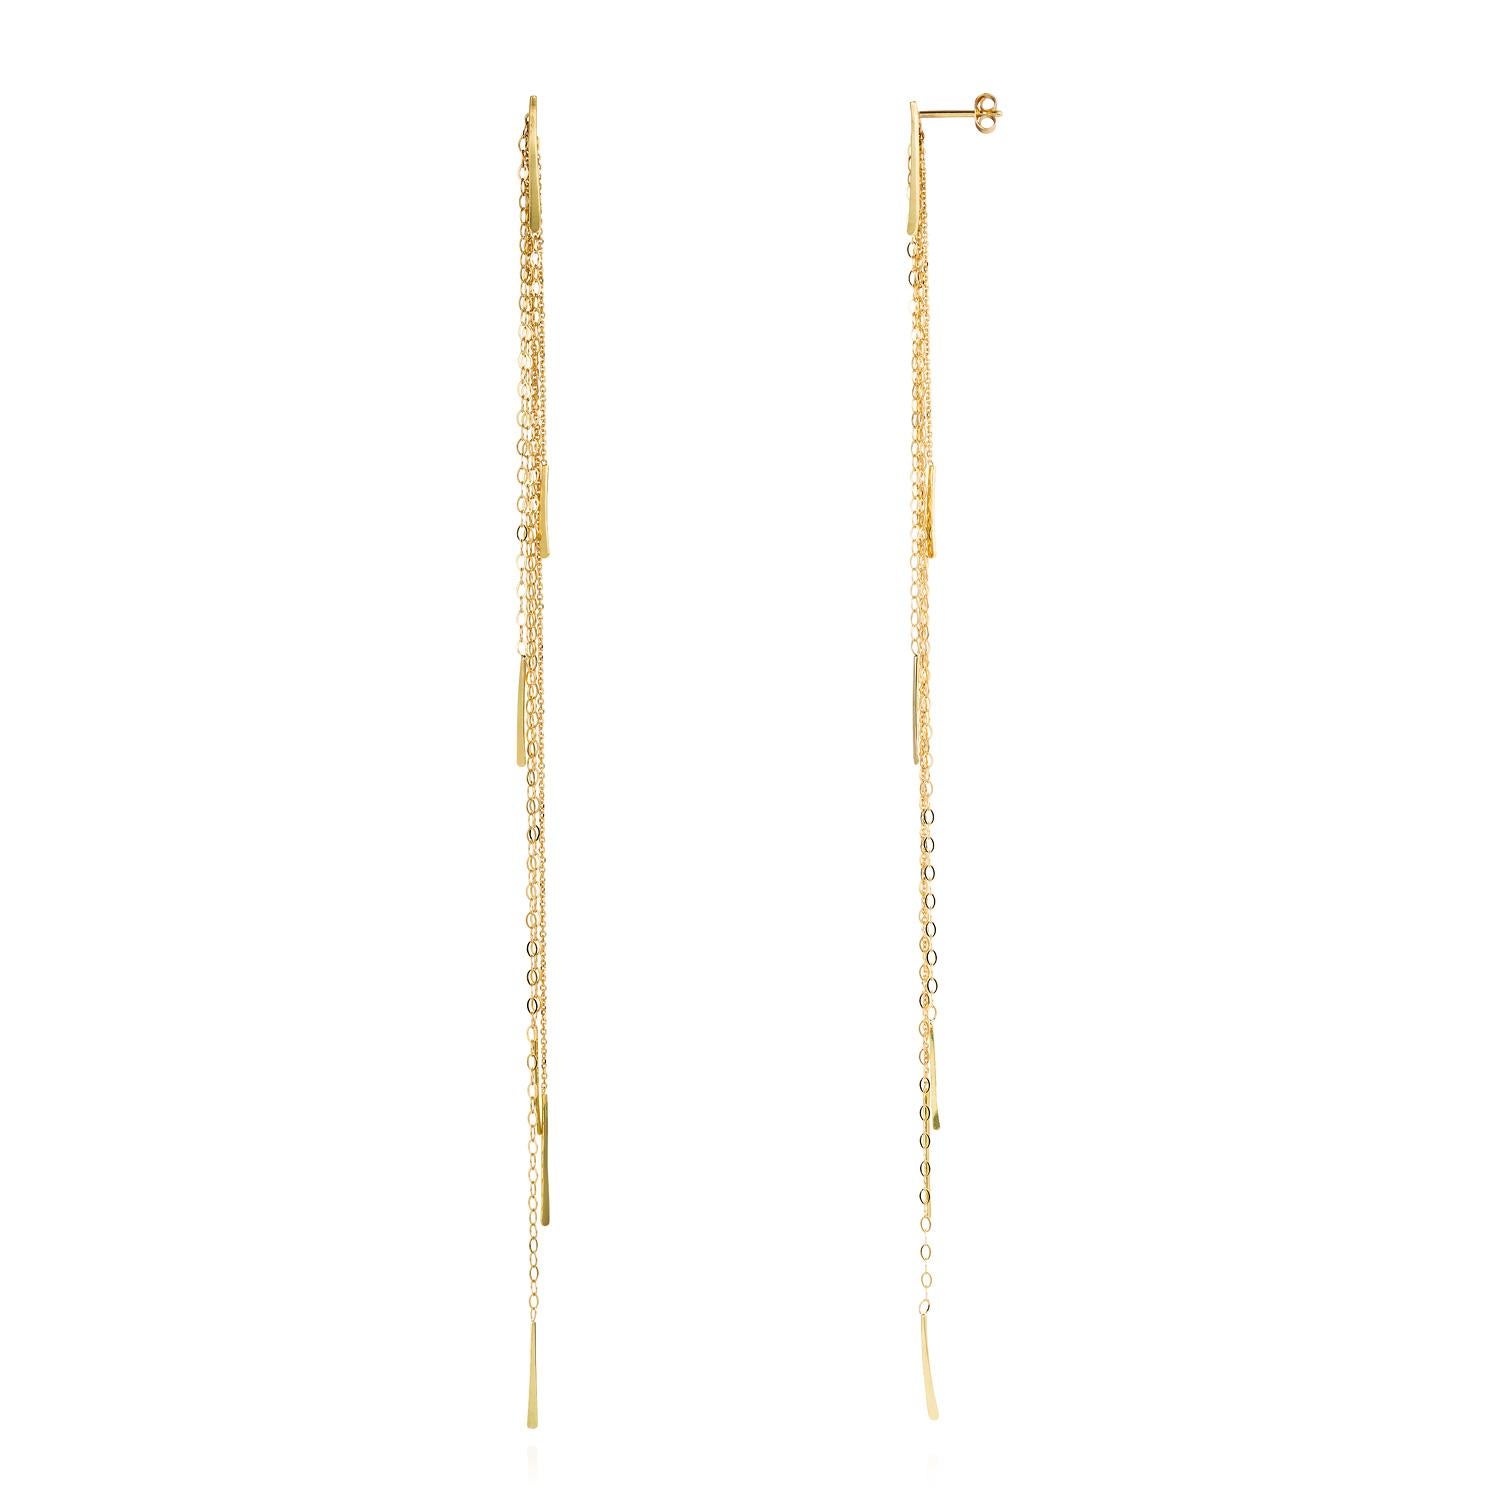 Sweet Pea Sycamore 18k Yellow Gold Long Chain Stud Earrings With Bar Details For Sale